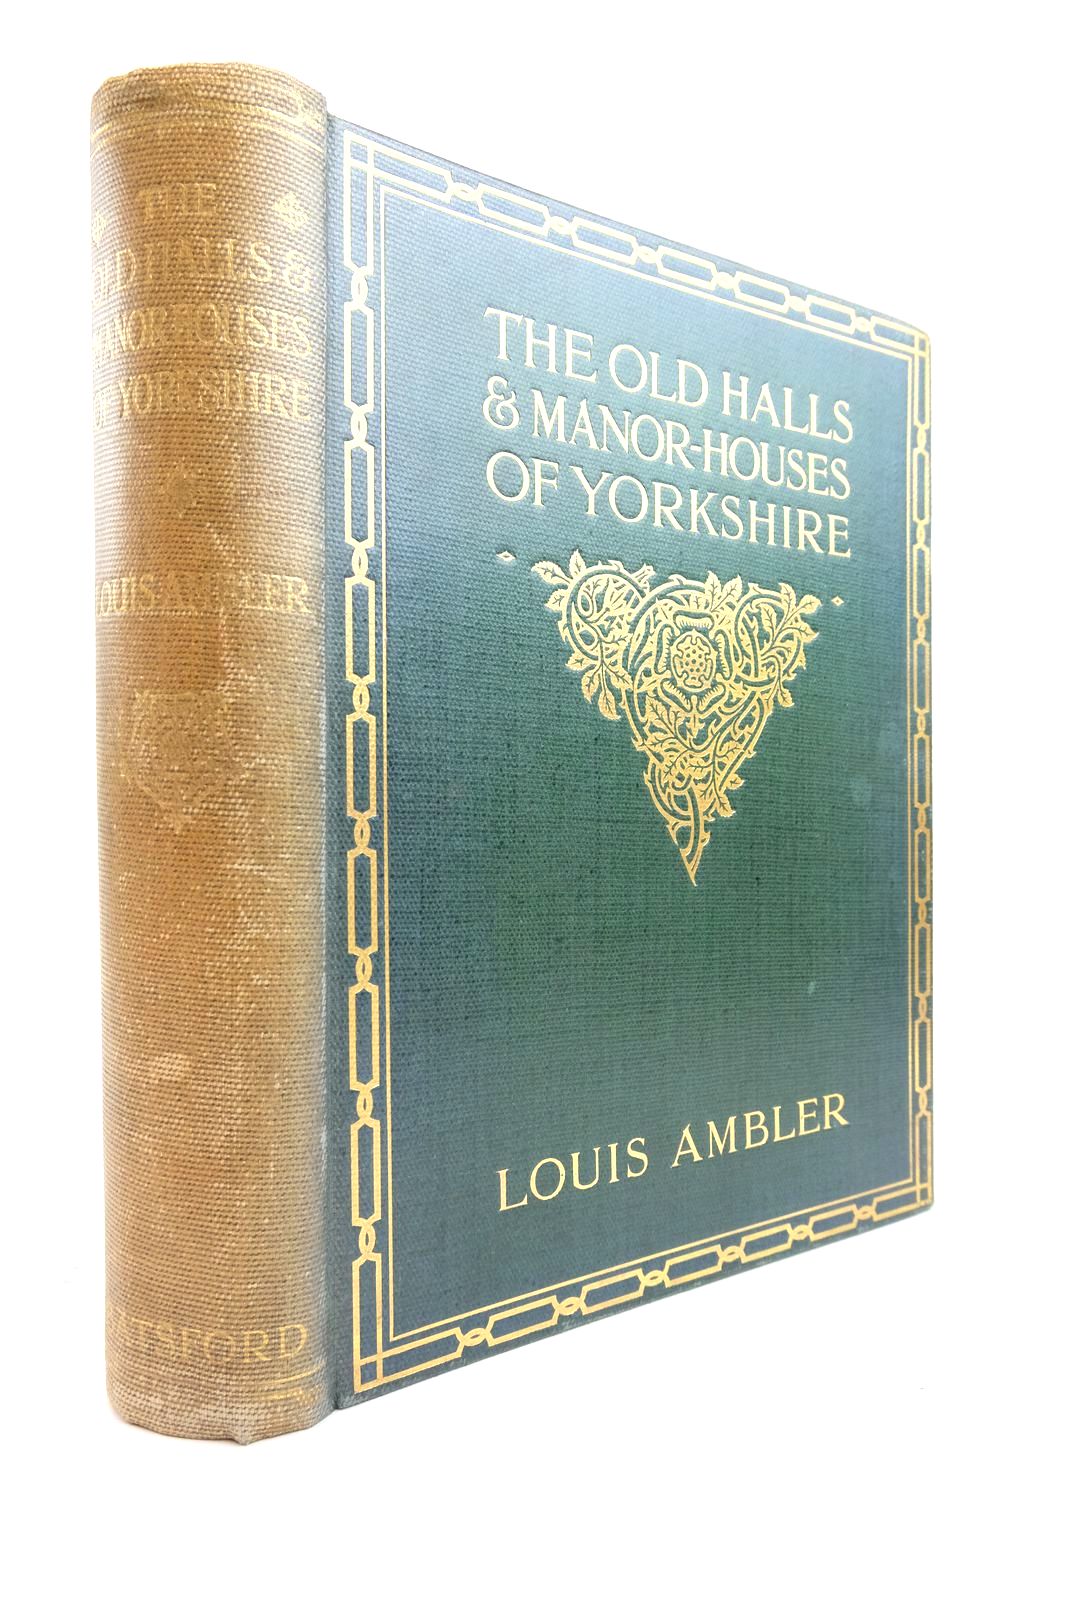 Photo of THE OLD HALLS &amp; MANOR HOUSES OF YORKSHIRE WITH SOME EXAMPLES OF OTHER HOUSES BUILT BEFORE THE YEAR 1700 written by Ambler, Louis published by B.T. Batsford (STOCK CODE: 2134791)  for sale by Stella & Rose's Books